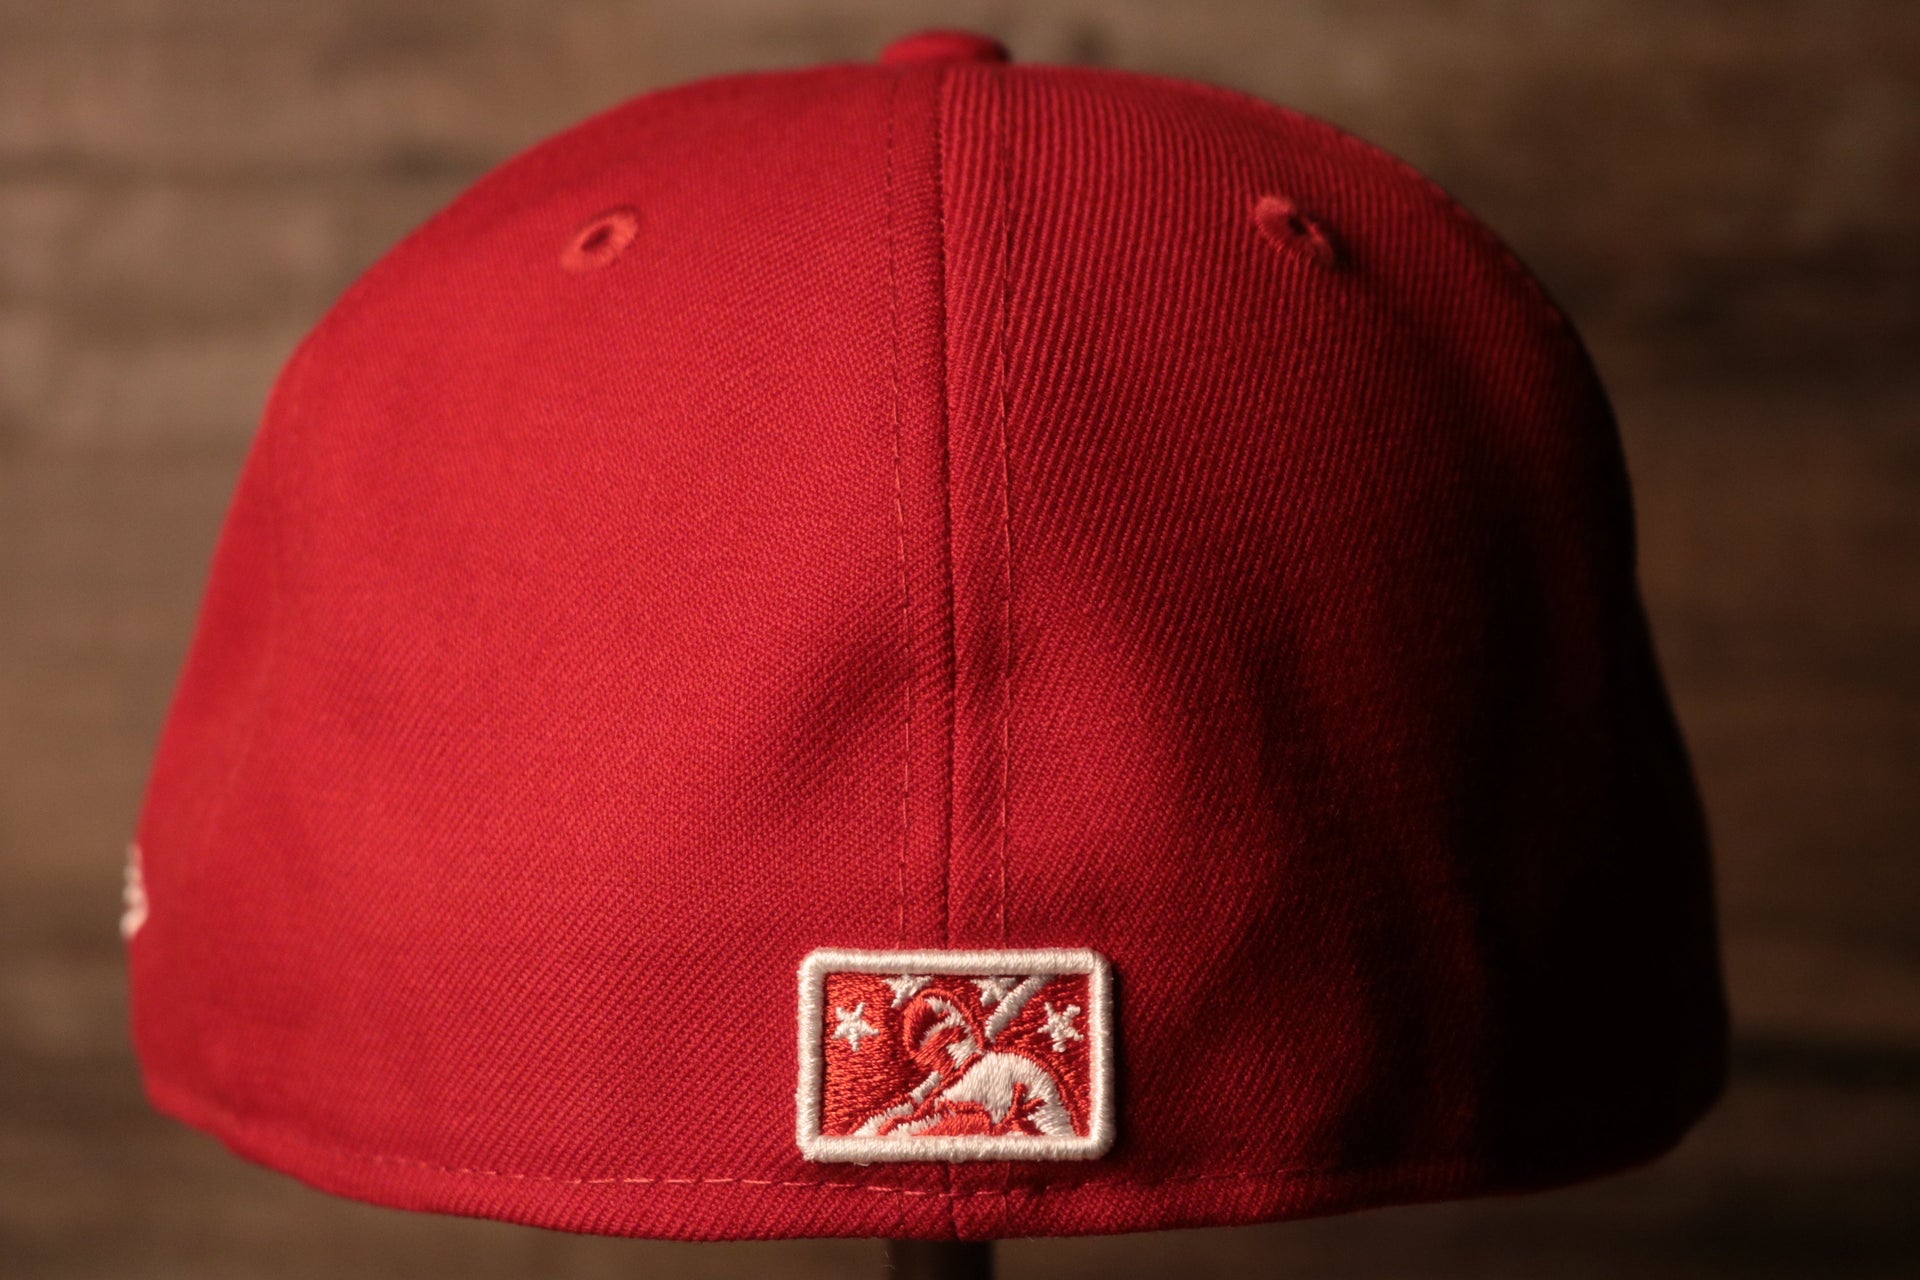 the back of this cap has the minor league baseball logo Grey Bottom Fitted Cap | Jawn Red Gray Bottom Fitted Hat